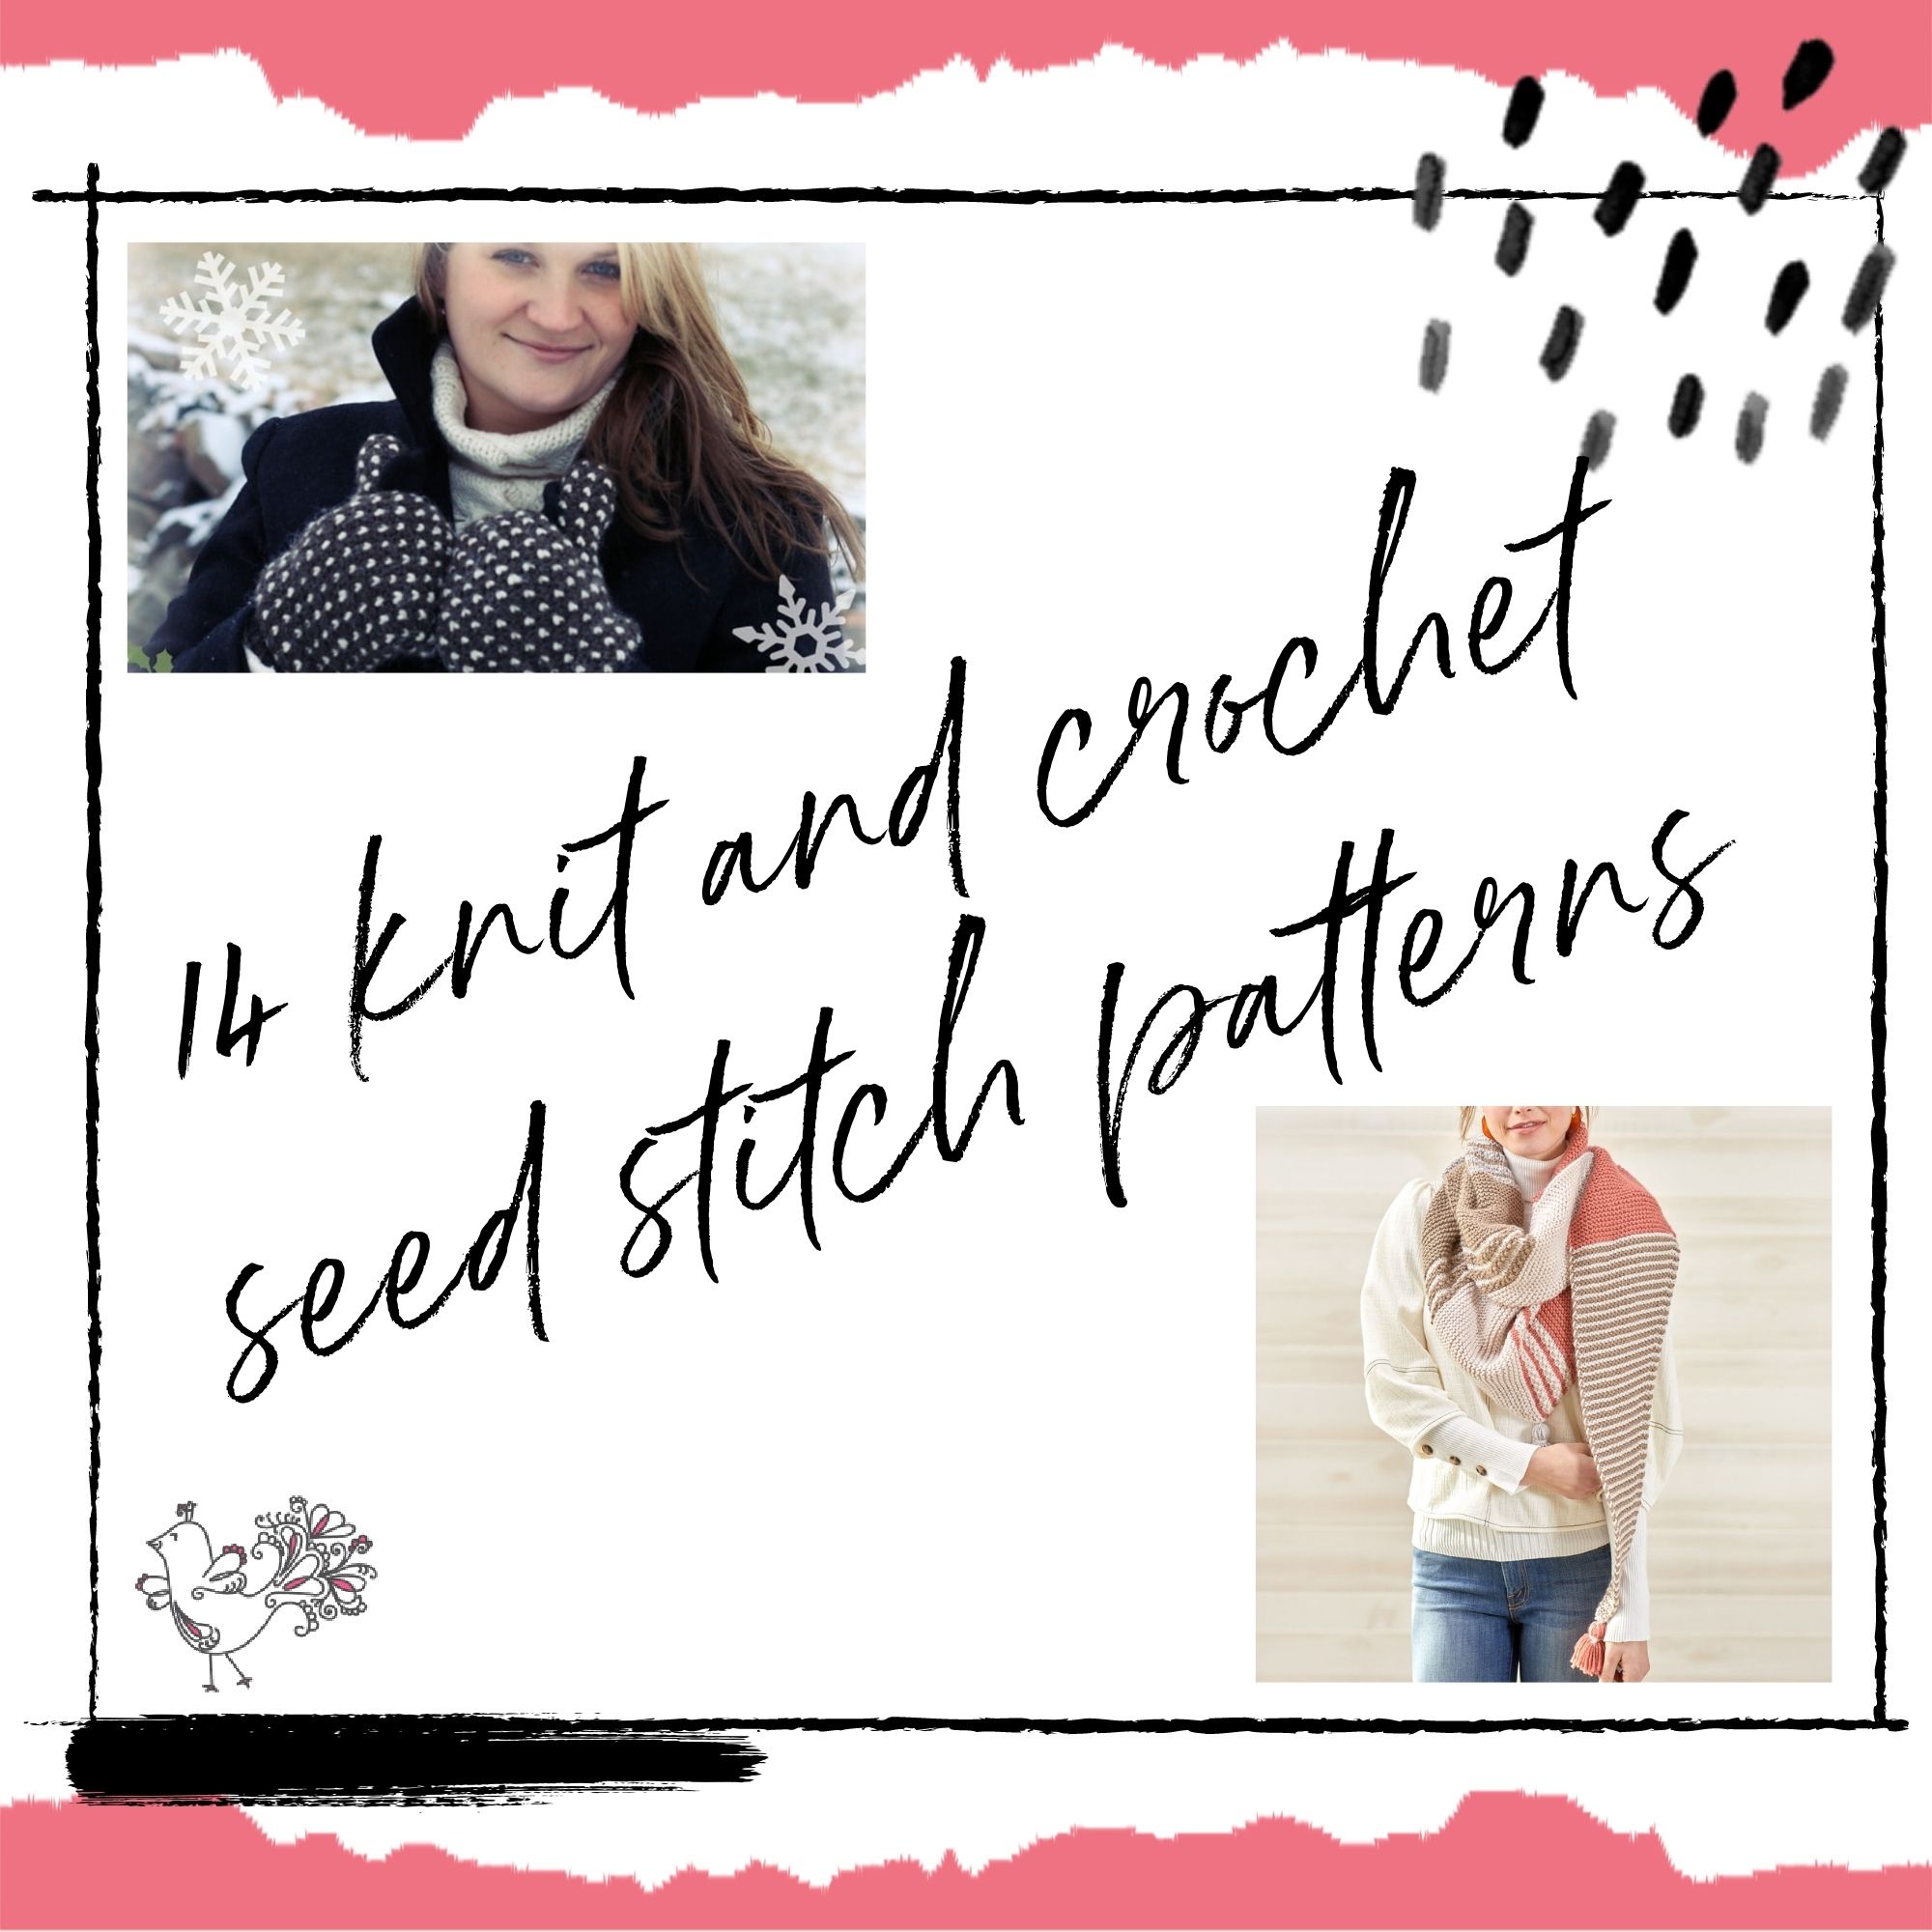 14 Seed Stitch Patterns: Texture in Both Knitting and Crochet | Marly Bird